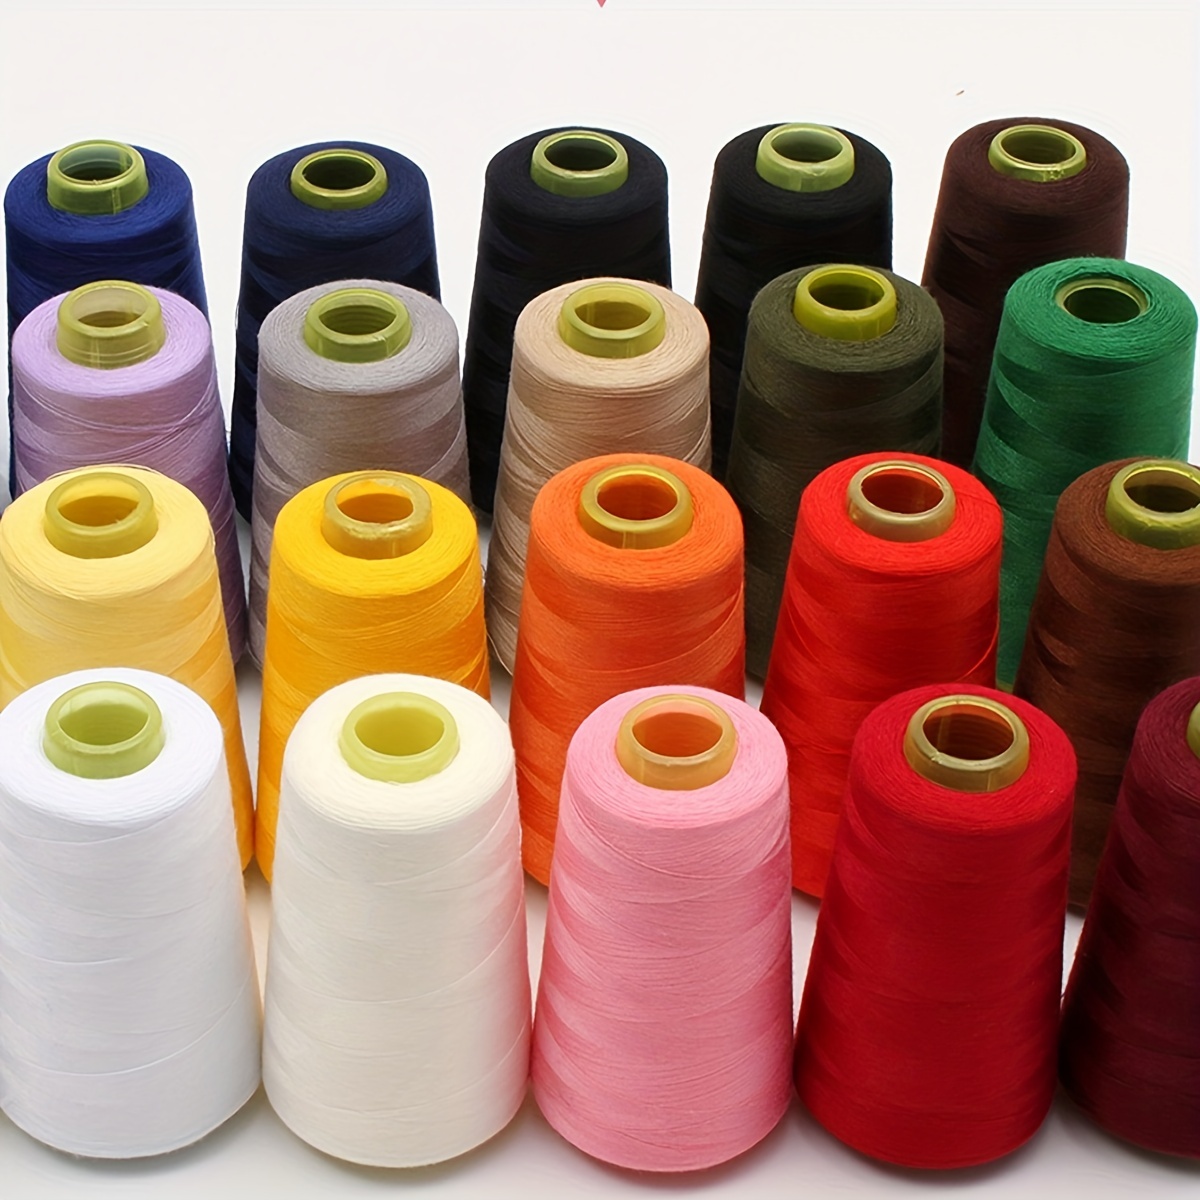 10 Rolls Set 1000 Yards Sewing Thread Polyester Threads For Sewing  Needlework Quilting Overlock Embroidery Hand Repair Thread Brown Series